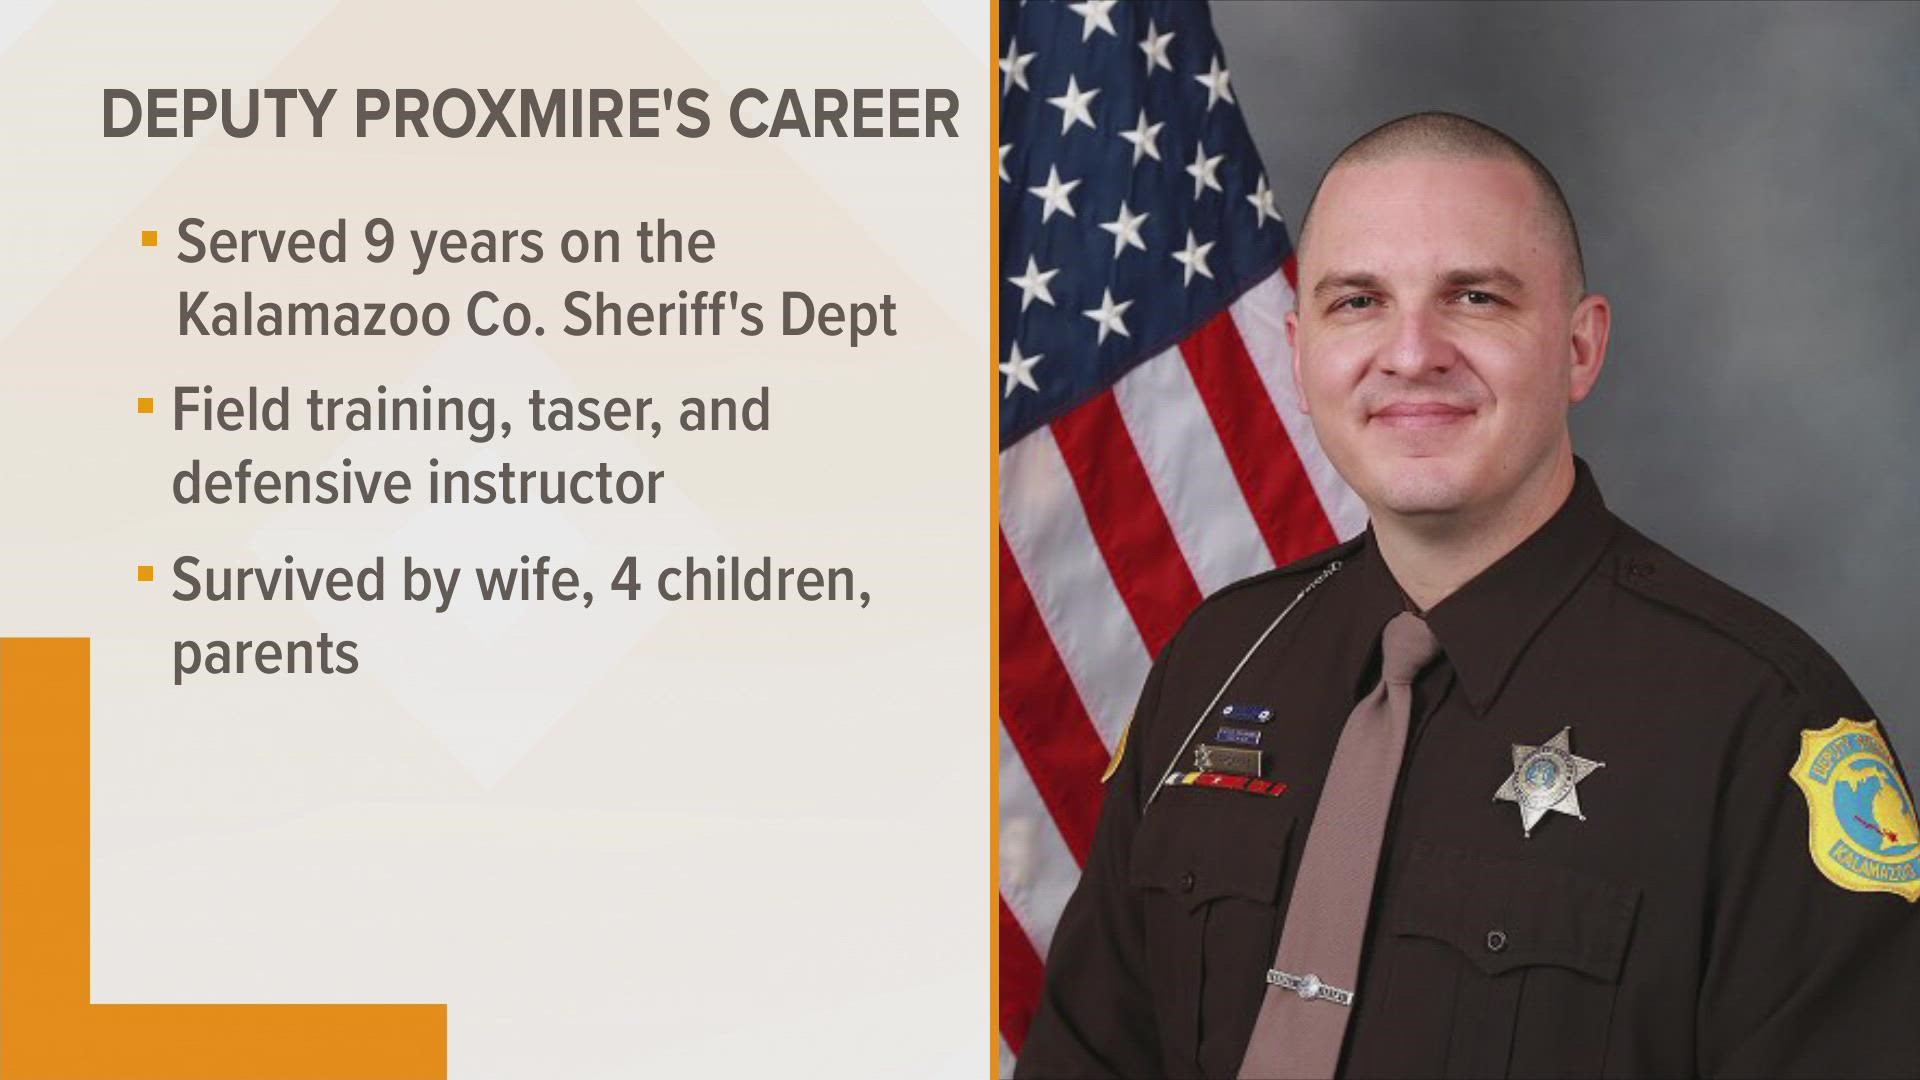 He served as a deputy sheriff for the Kalamazoo County Sheriff's Office, filled in as a temporary sergeant and shared his skills as an instructor.